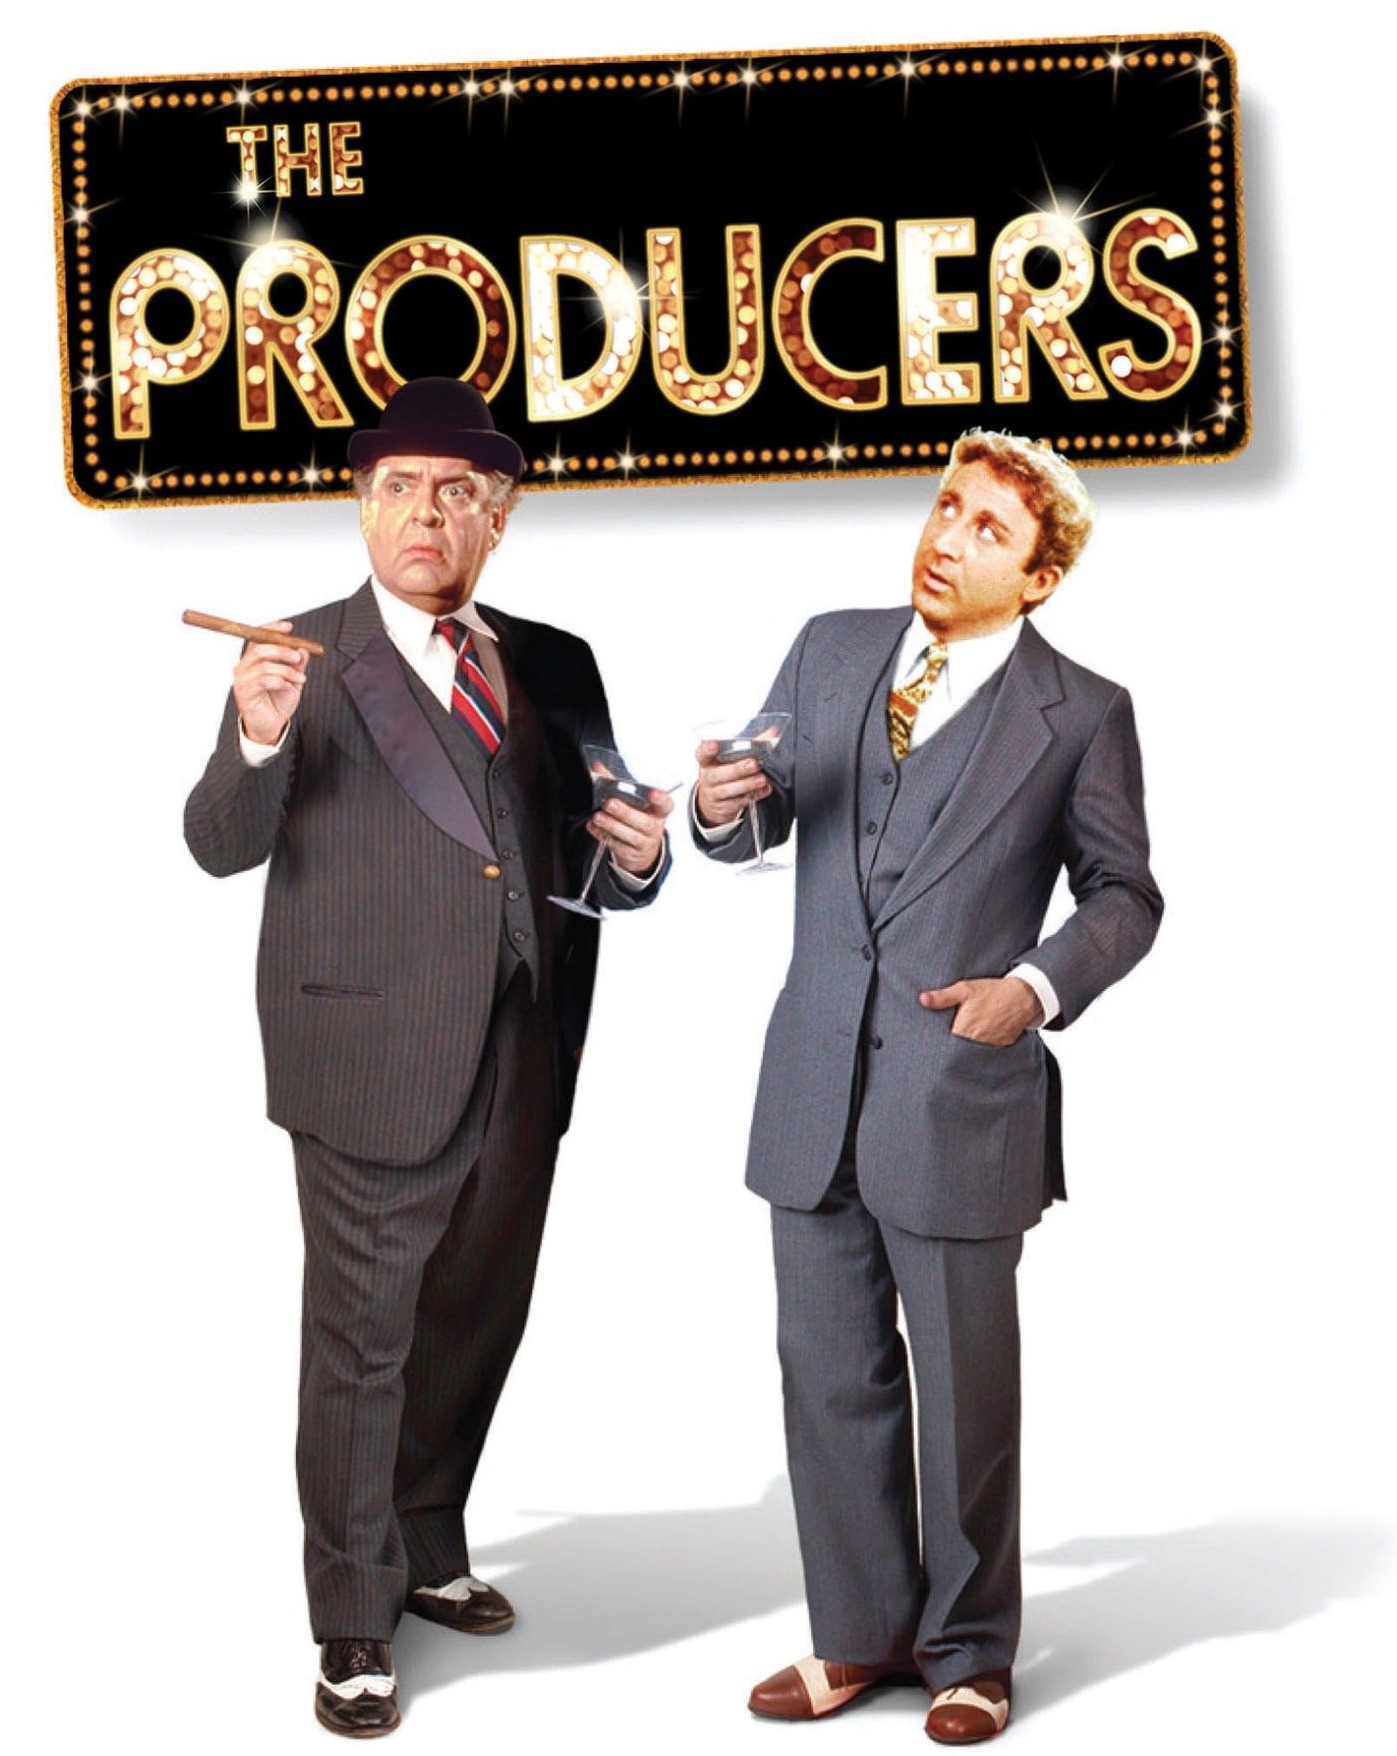 The Producers: Drama movie like Pitch Perfect